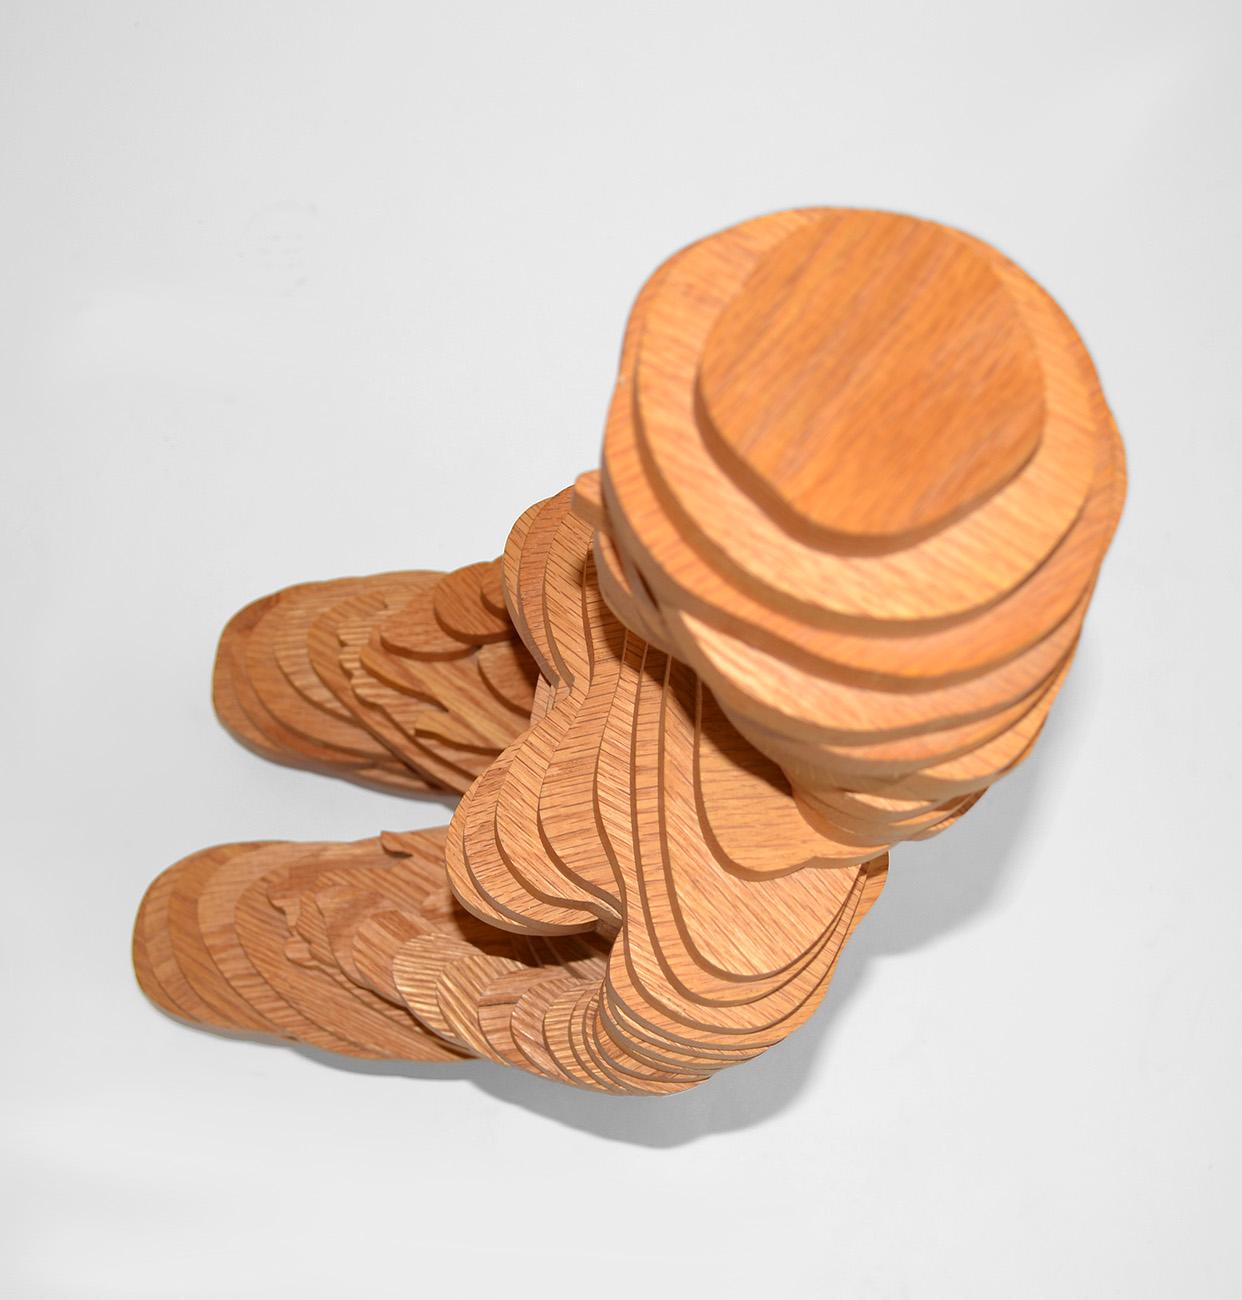 Female Sculpture in Joined Wood 3-D Cubist Surrealist by Reuben Karol, USA 1990s For Sale 2